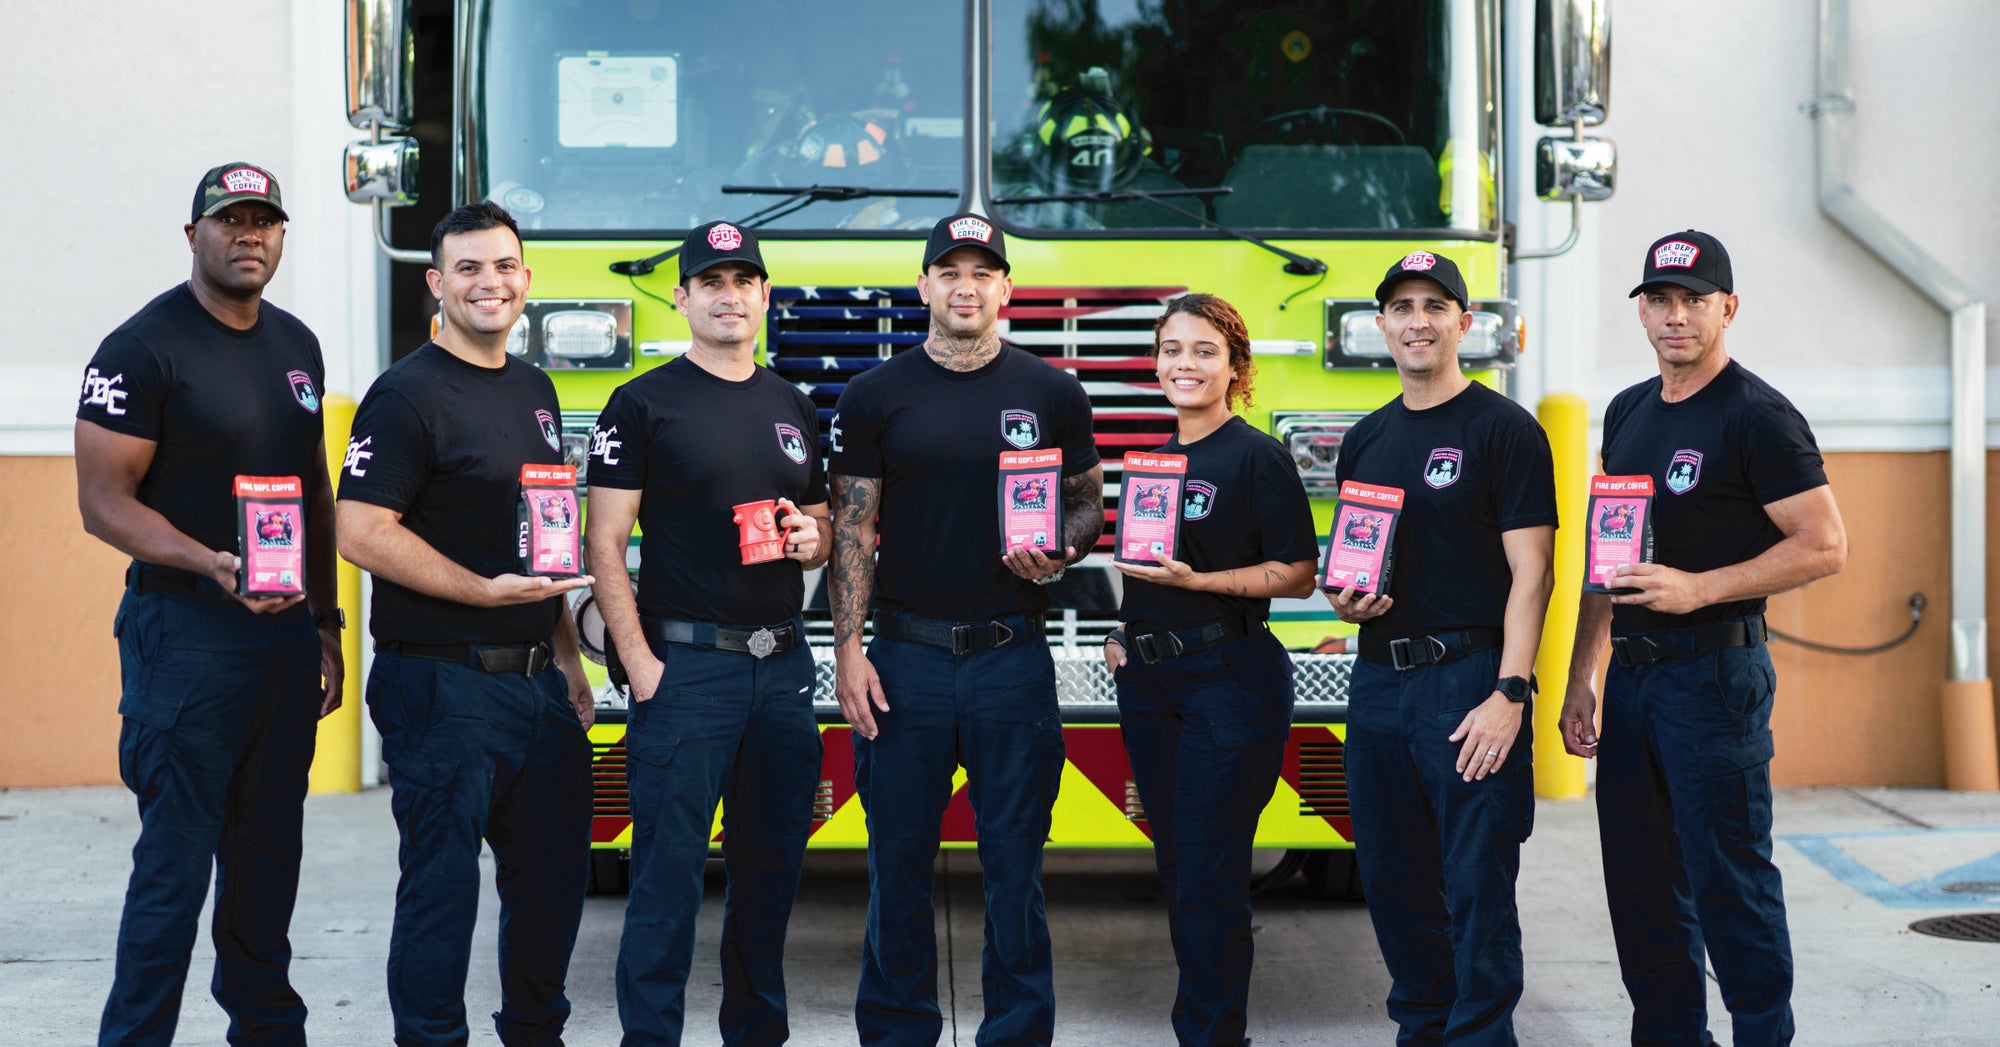 Group shot of Miami firefighters holding coffee and wearing shirts from Fire Department Coffee.